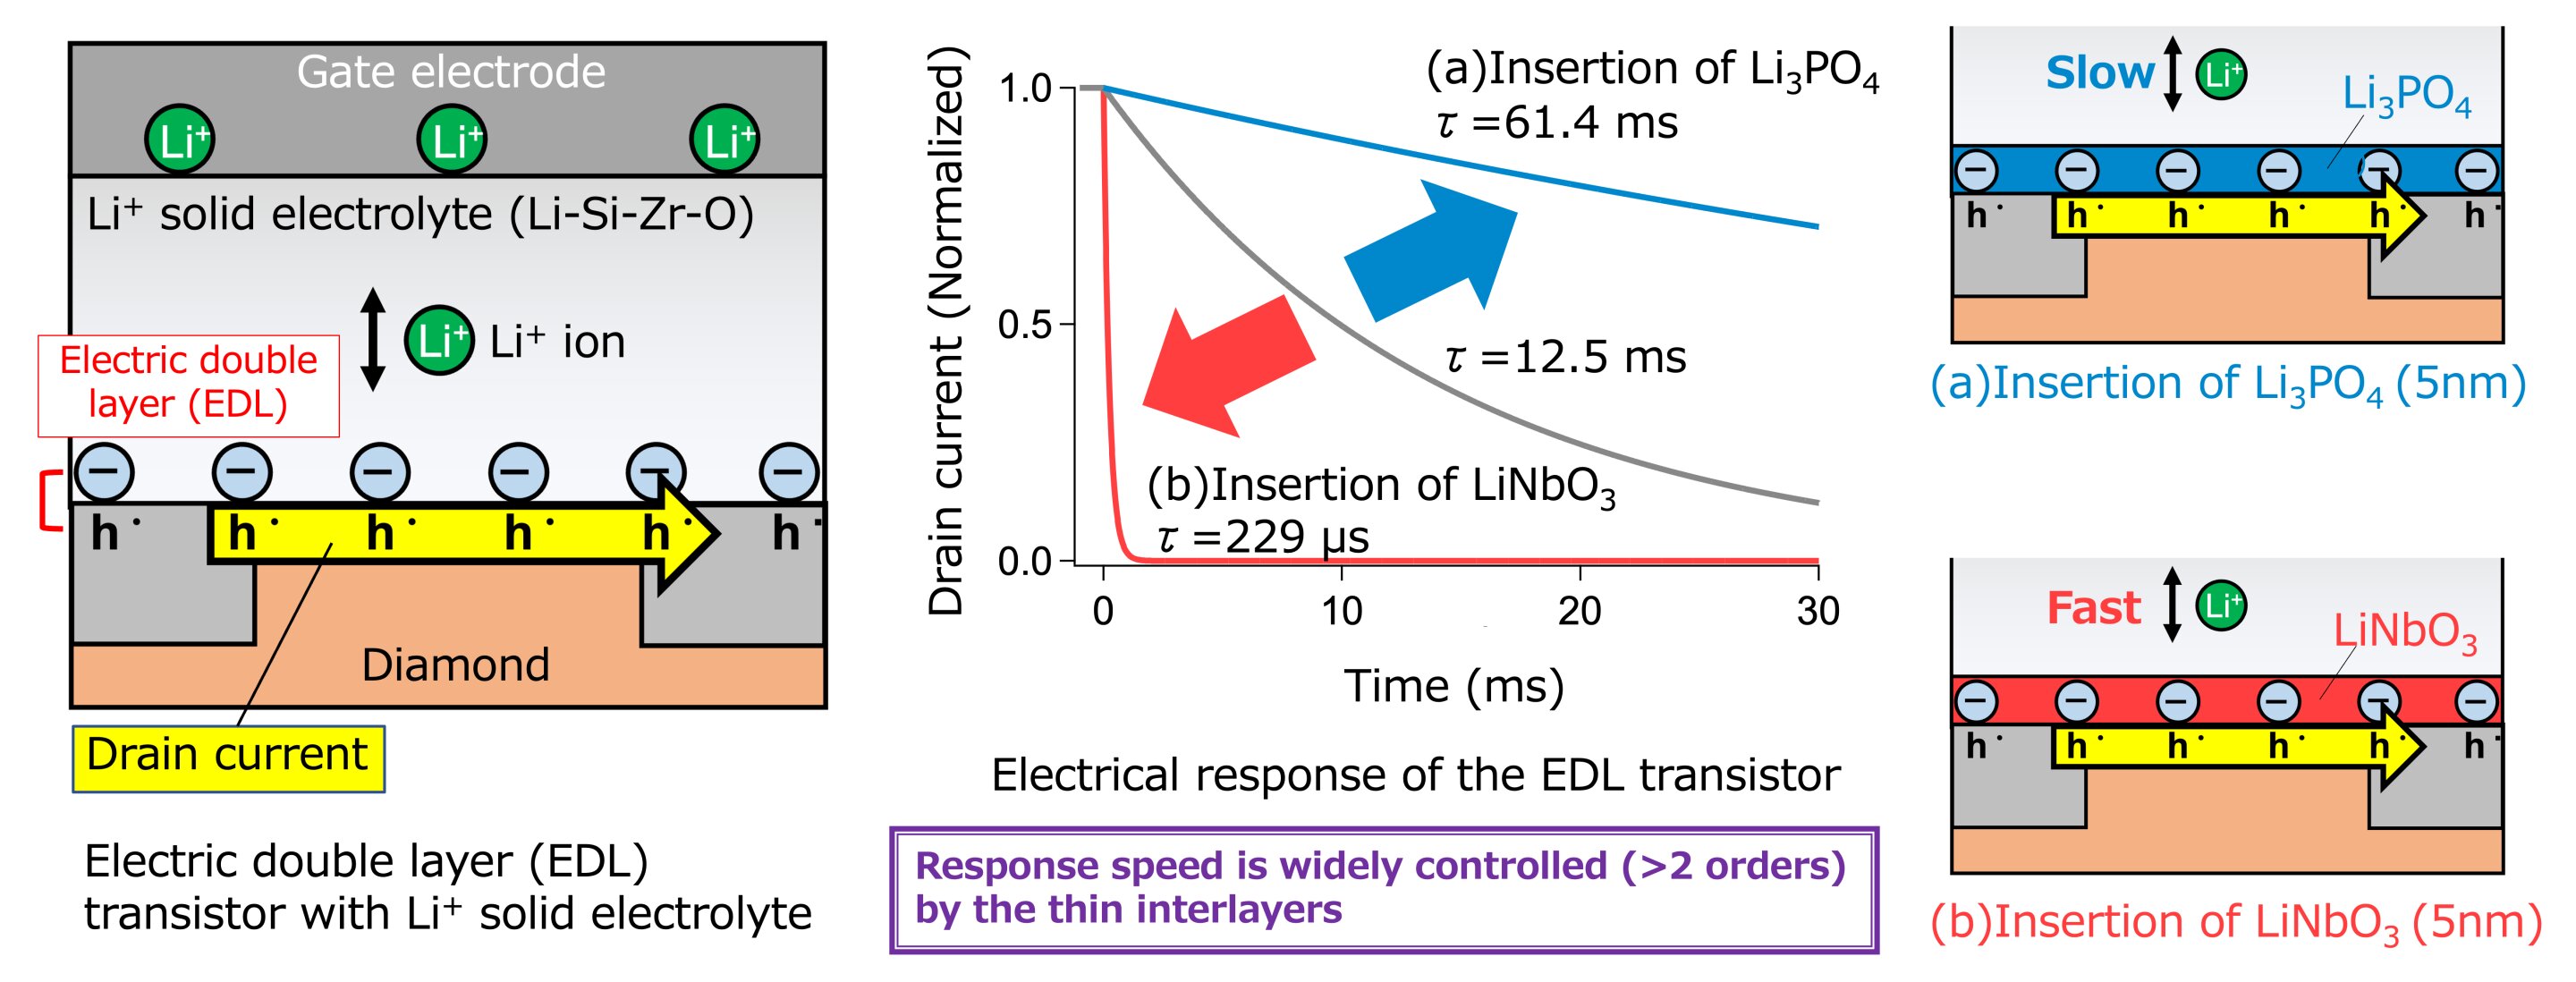 #Controlling electric double layer dynamics for next generation all-solid-state batteries